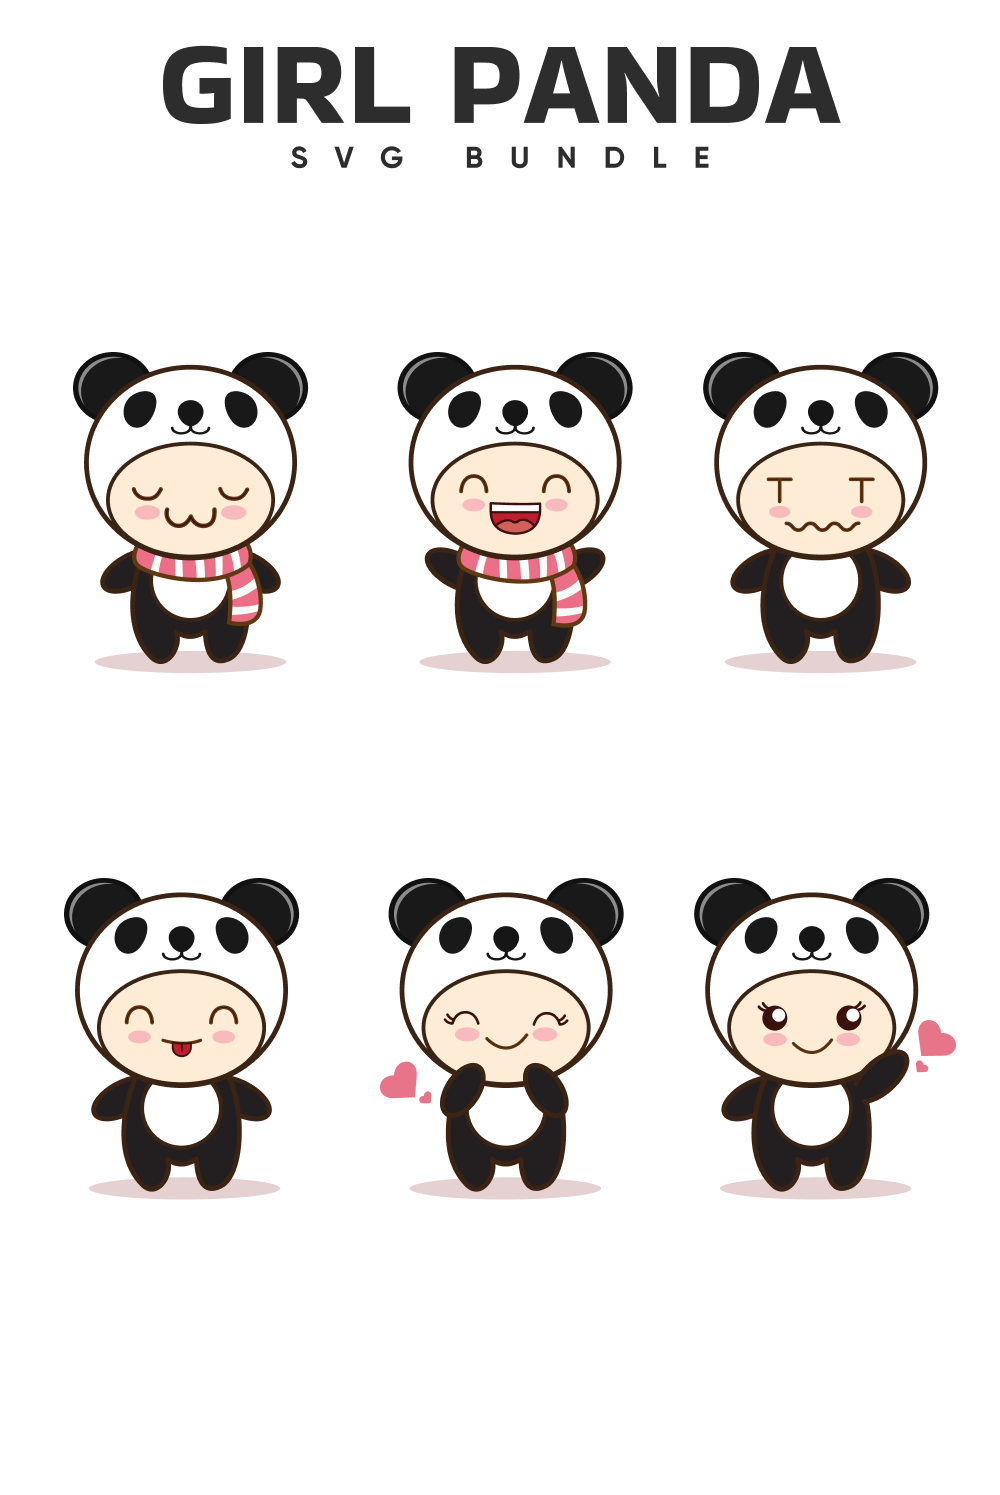 Bunch of pandas with different expressions.